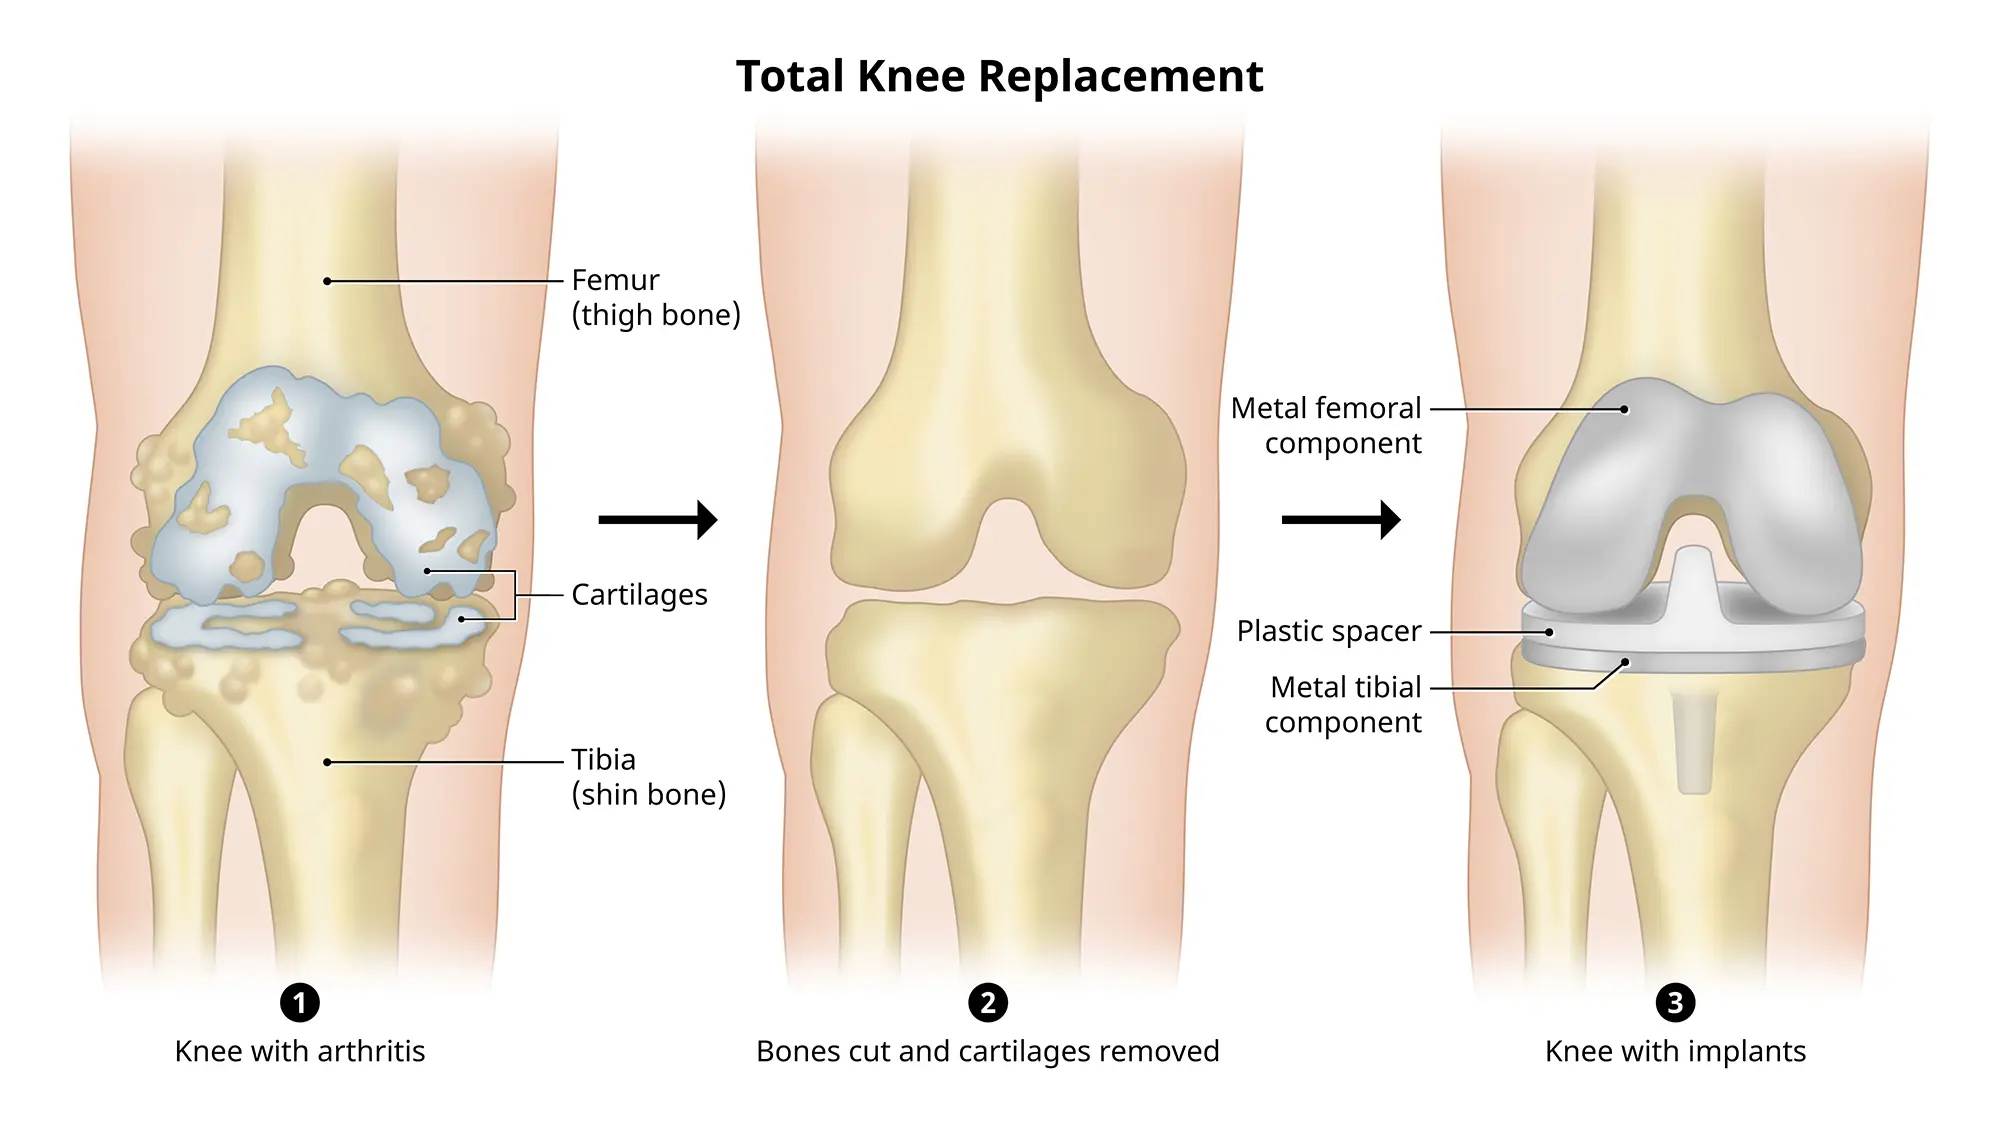 In a total knee replacement procedure, the damaged end of the femur and end of the tibia are removed and replaced with prosthesis